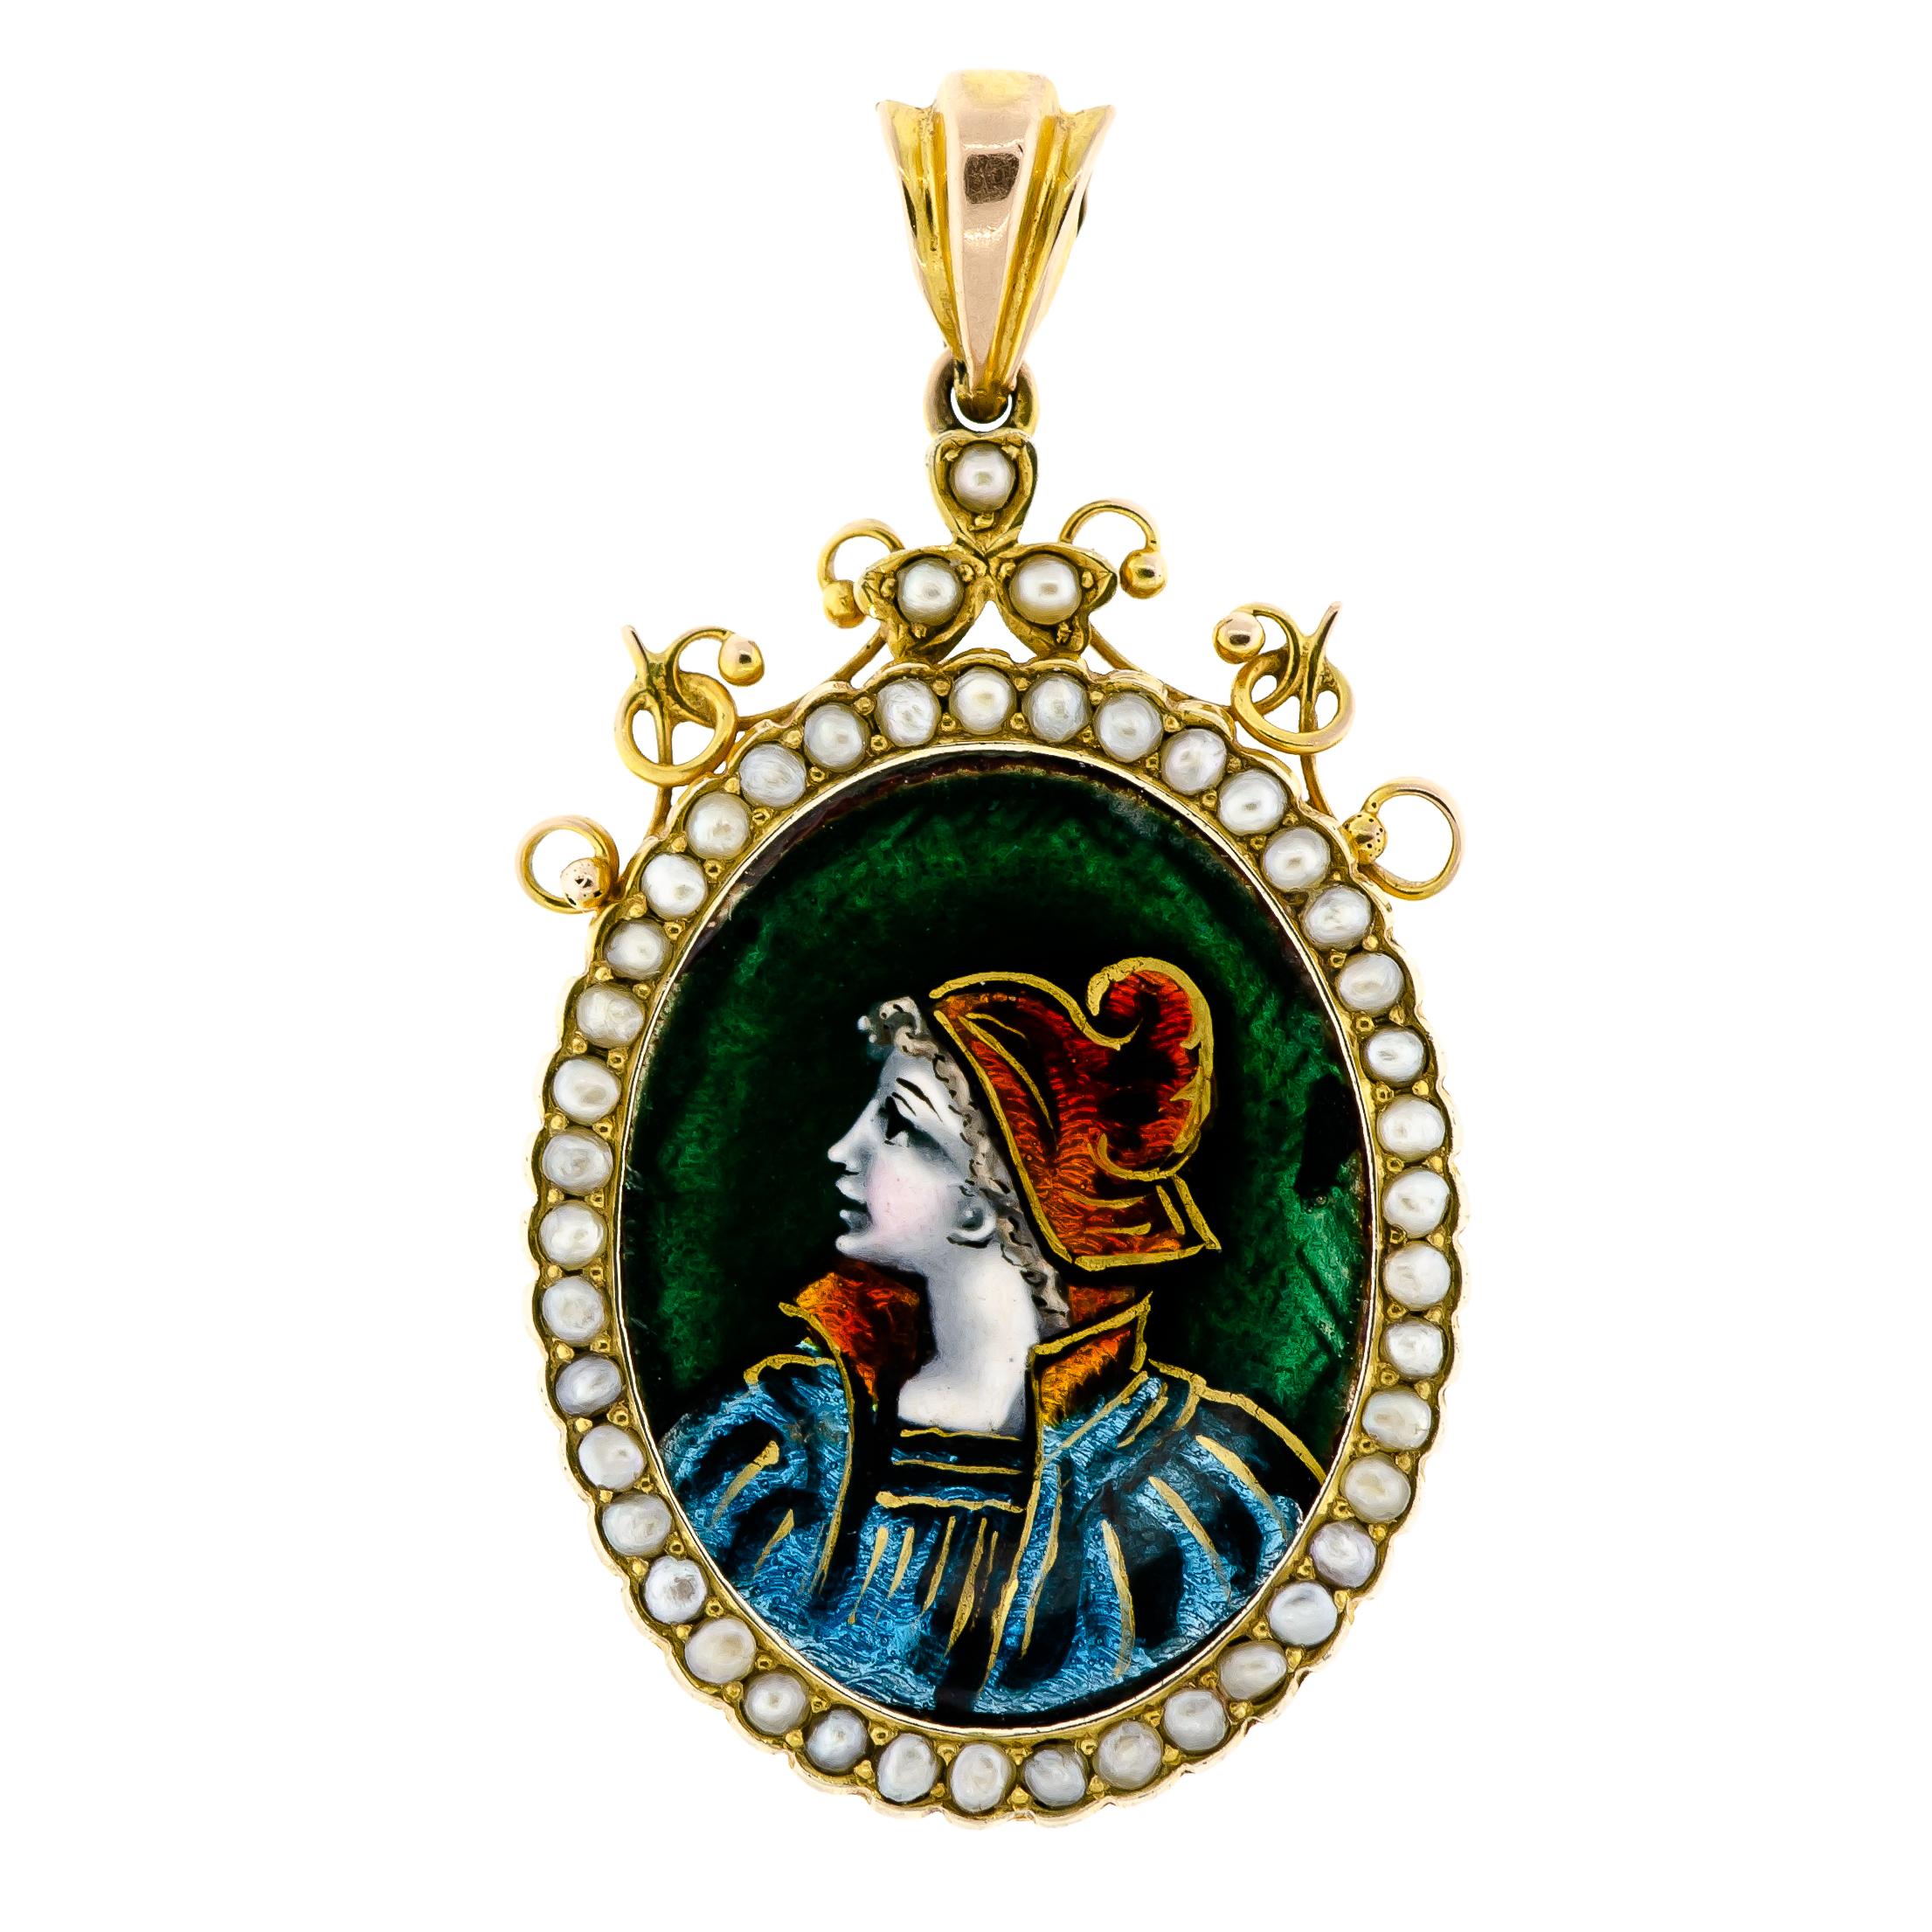 Turn-of-the-Century Antique Enamel and Pearl Miniature Locket For Sale